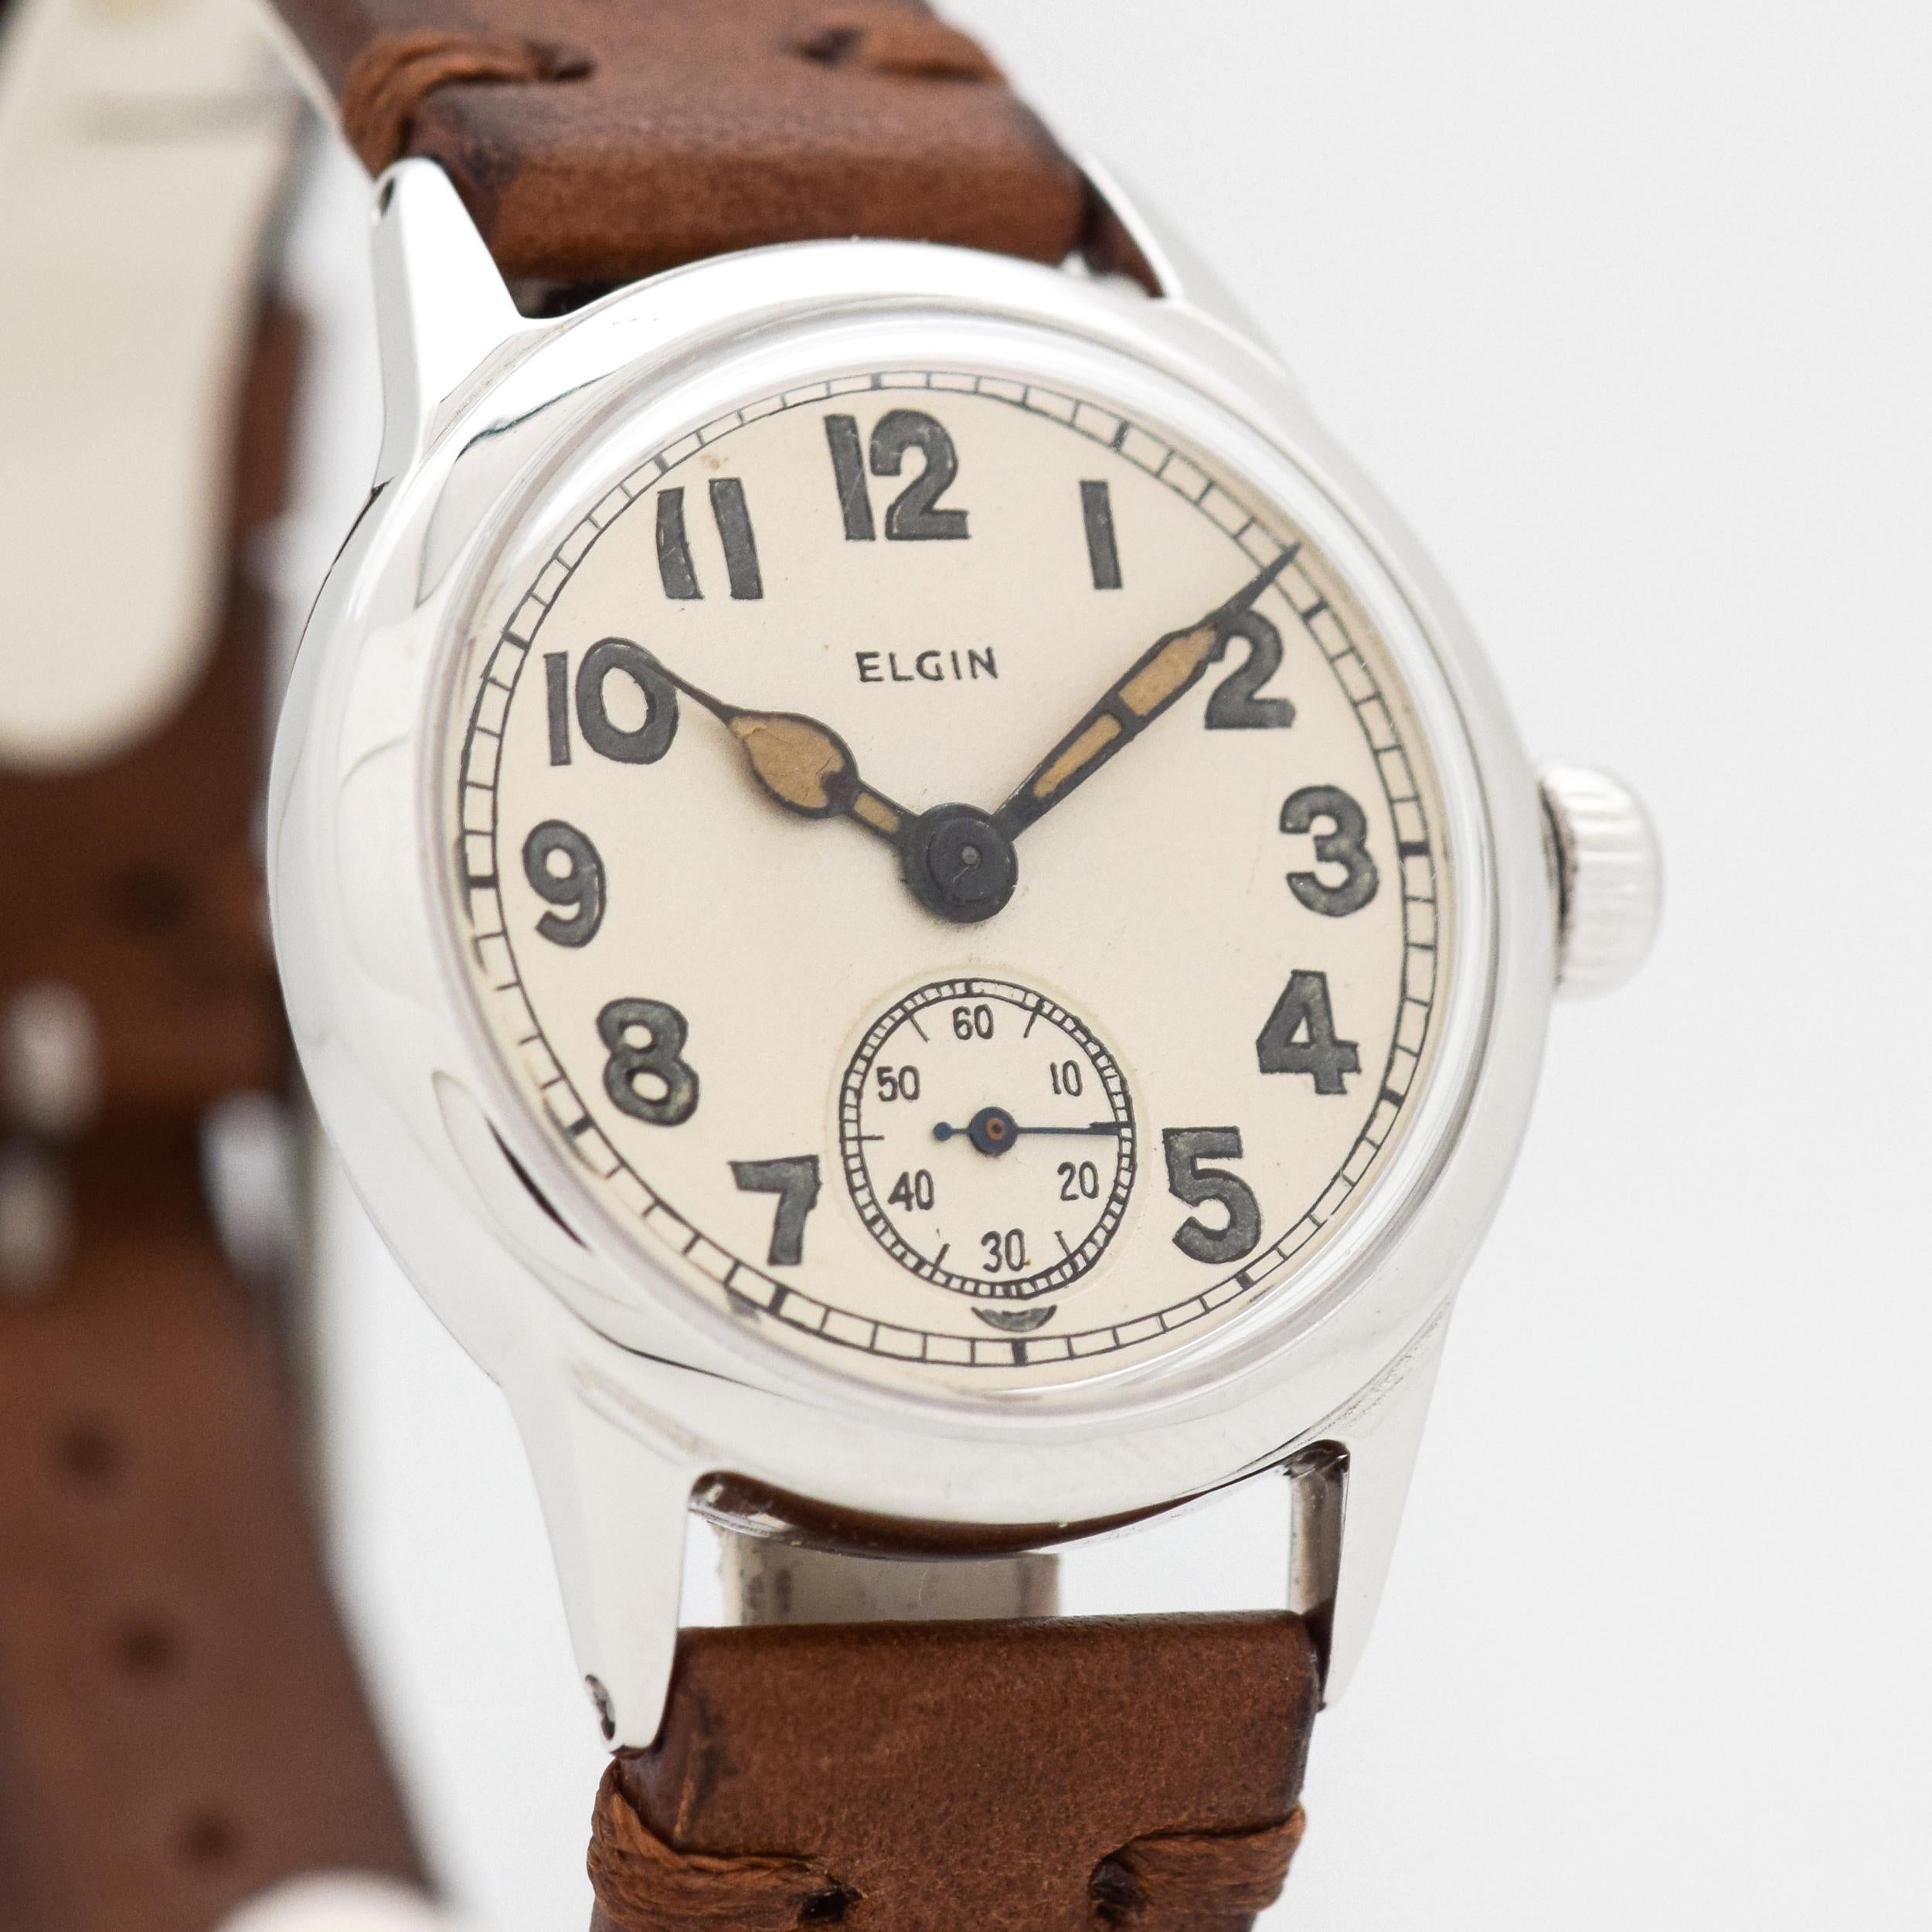 1944 Vintage Elgin WWII-era Military Watch. Base Metal case that measures in at 32mm wide. Original, but restored dial with Arabic numerals. Powered by a 17-jewel, manual caliber movement. US Military. 